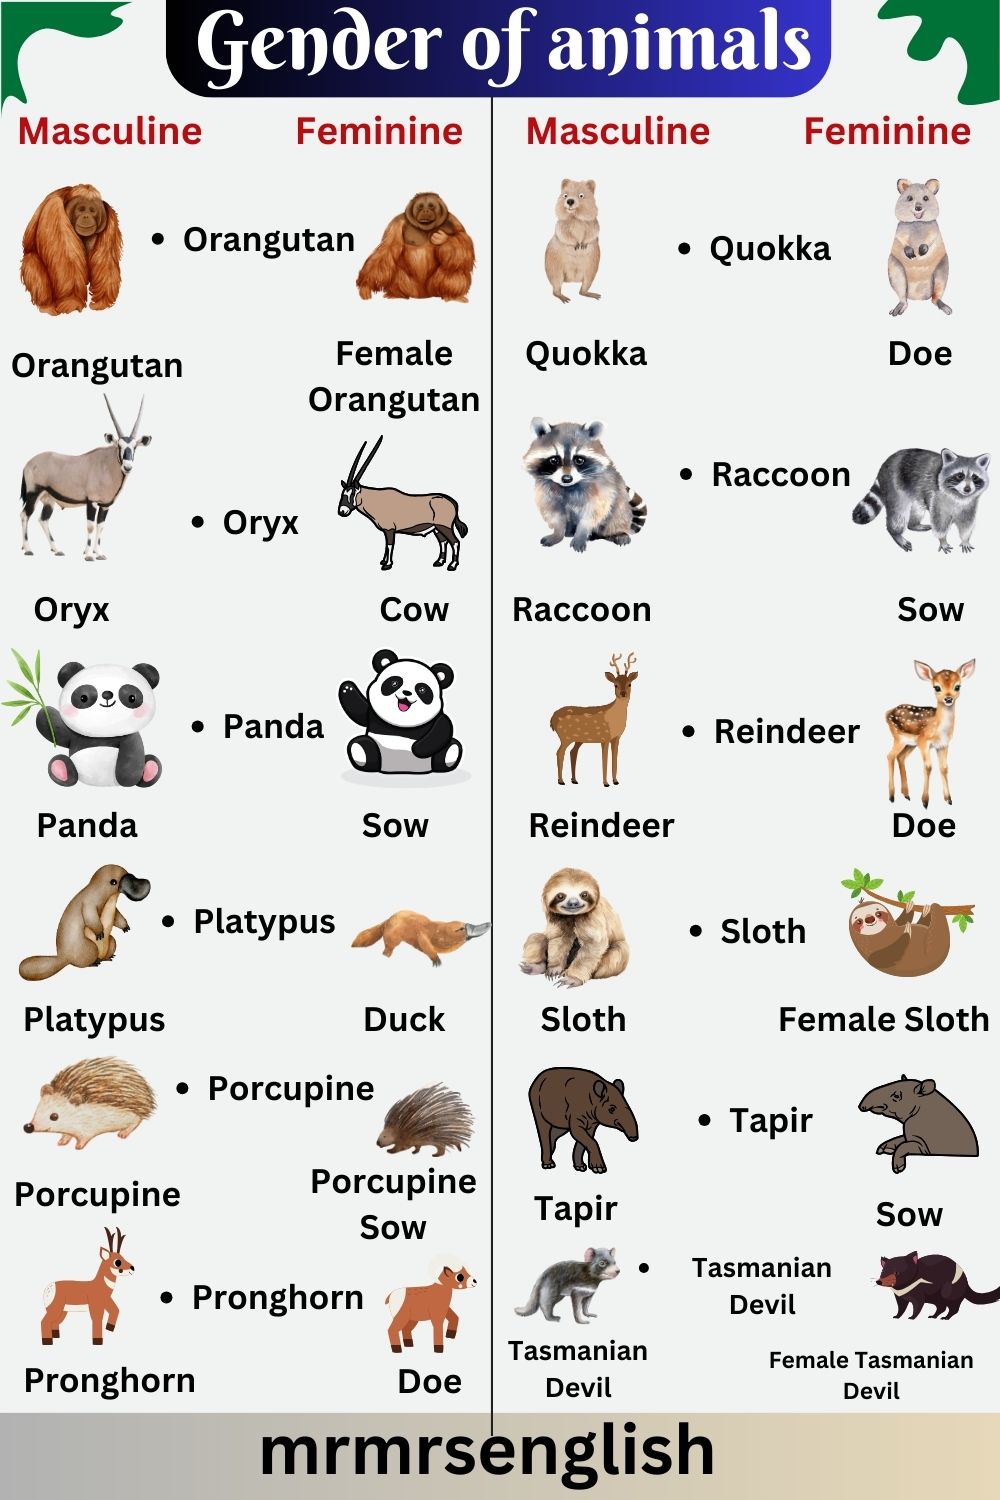 Masculine and Feminine Gender of Animals in English